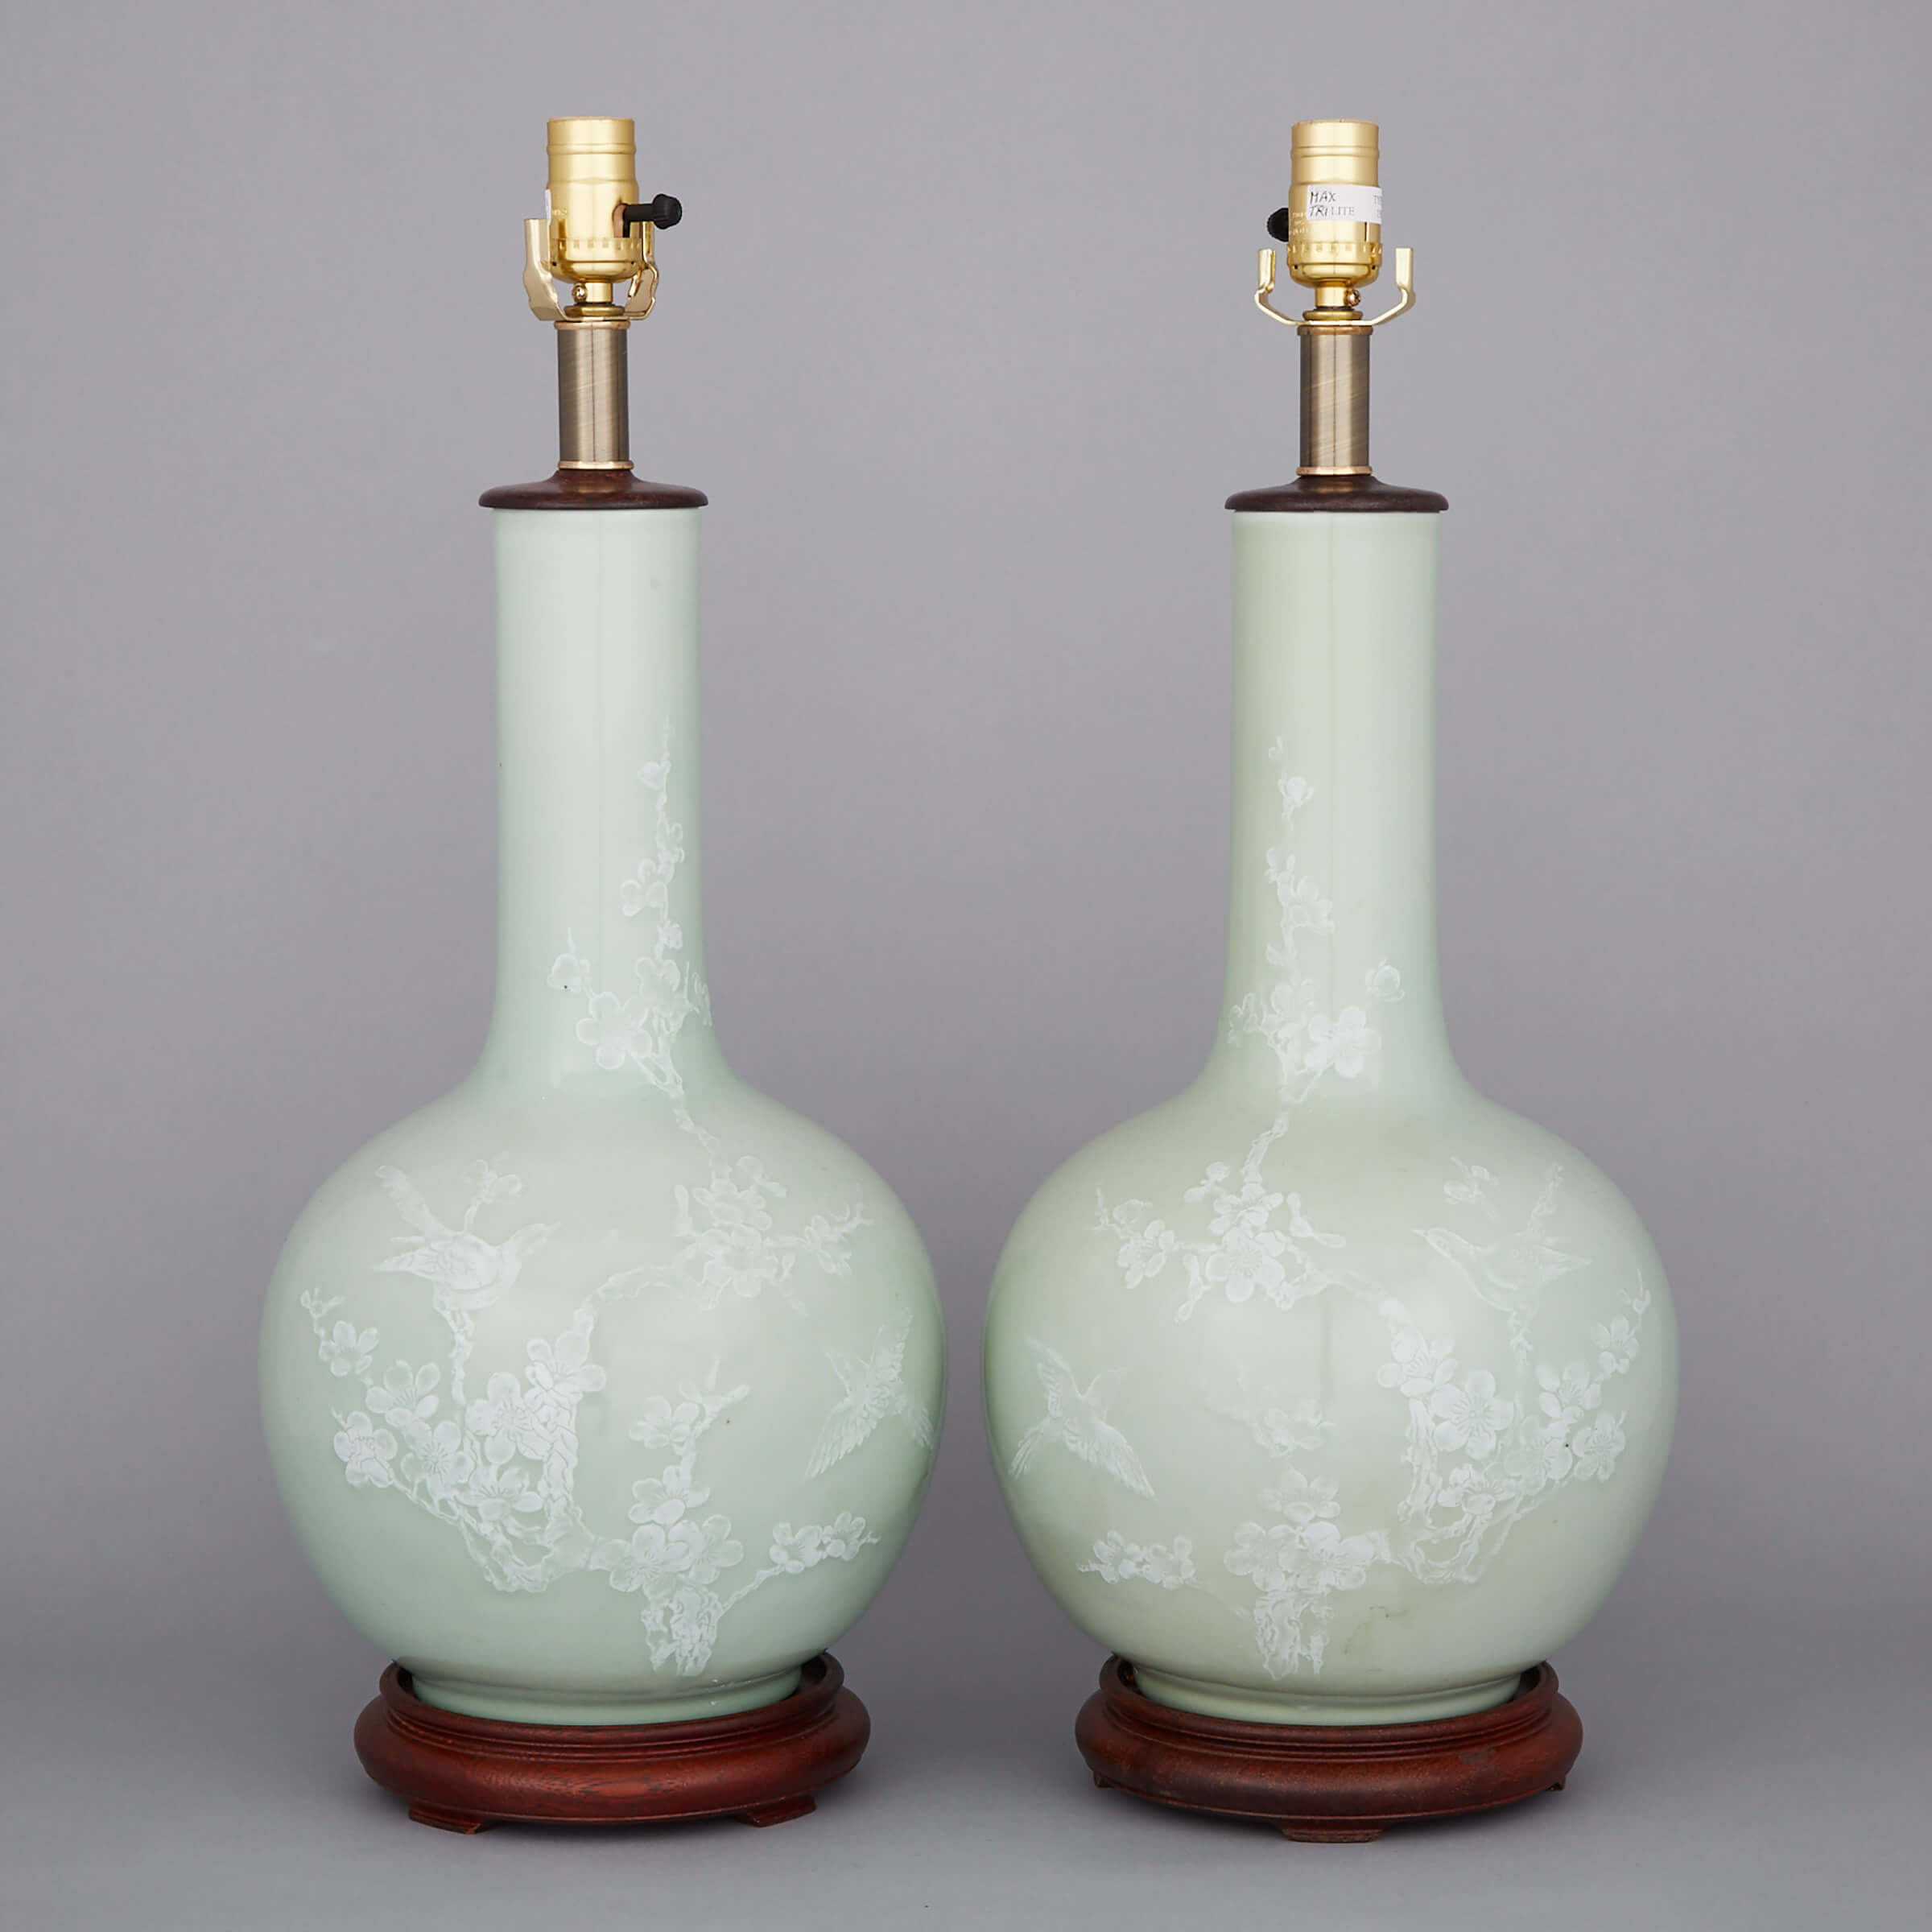 A Pair of White Slip Moulded Vase Lamps